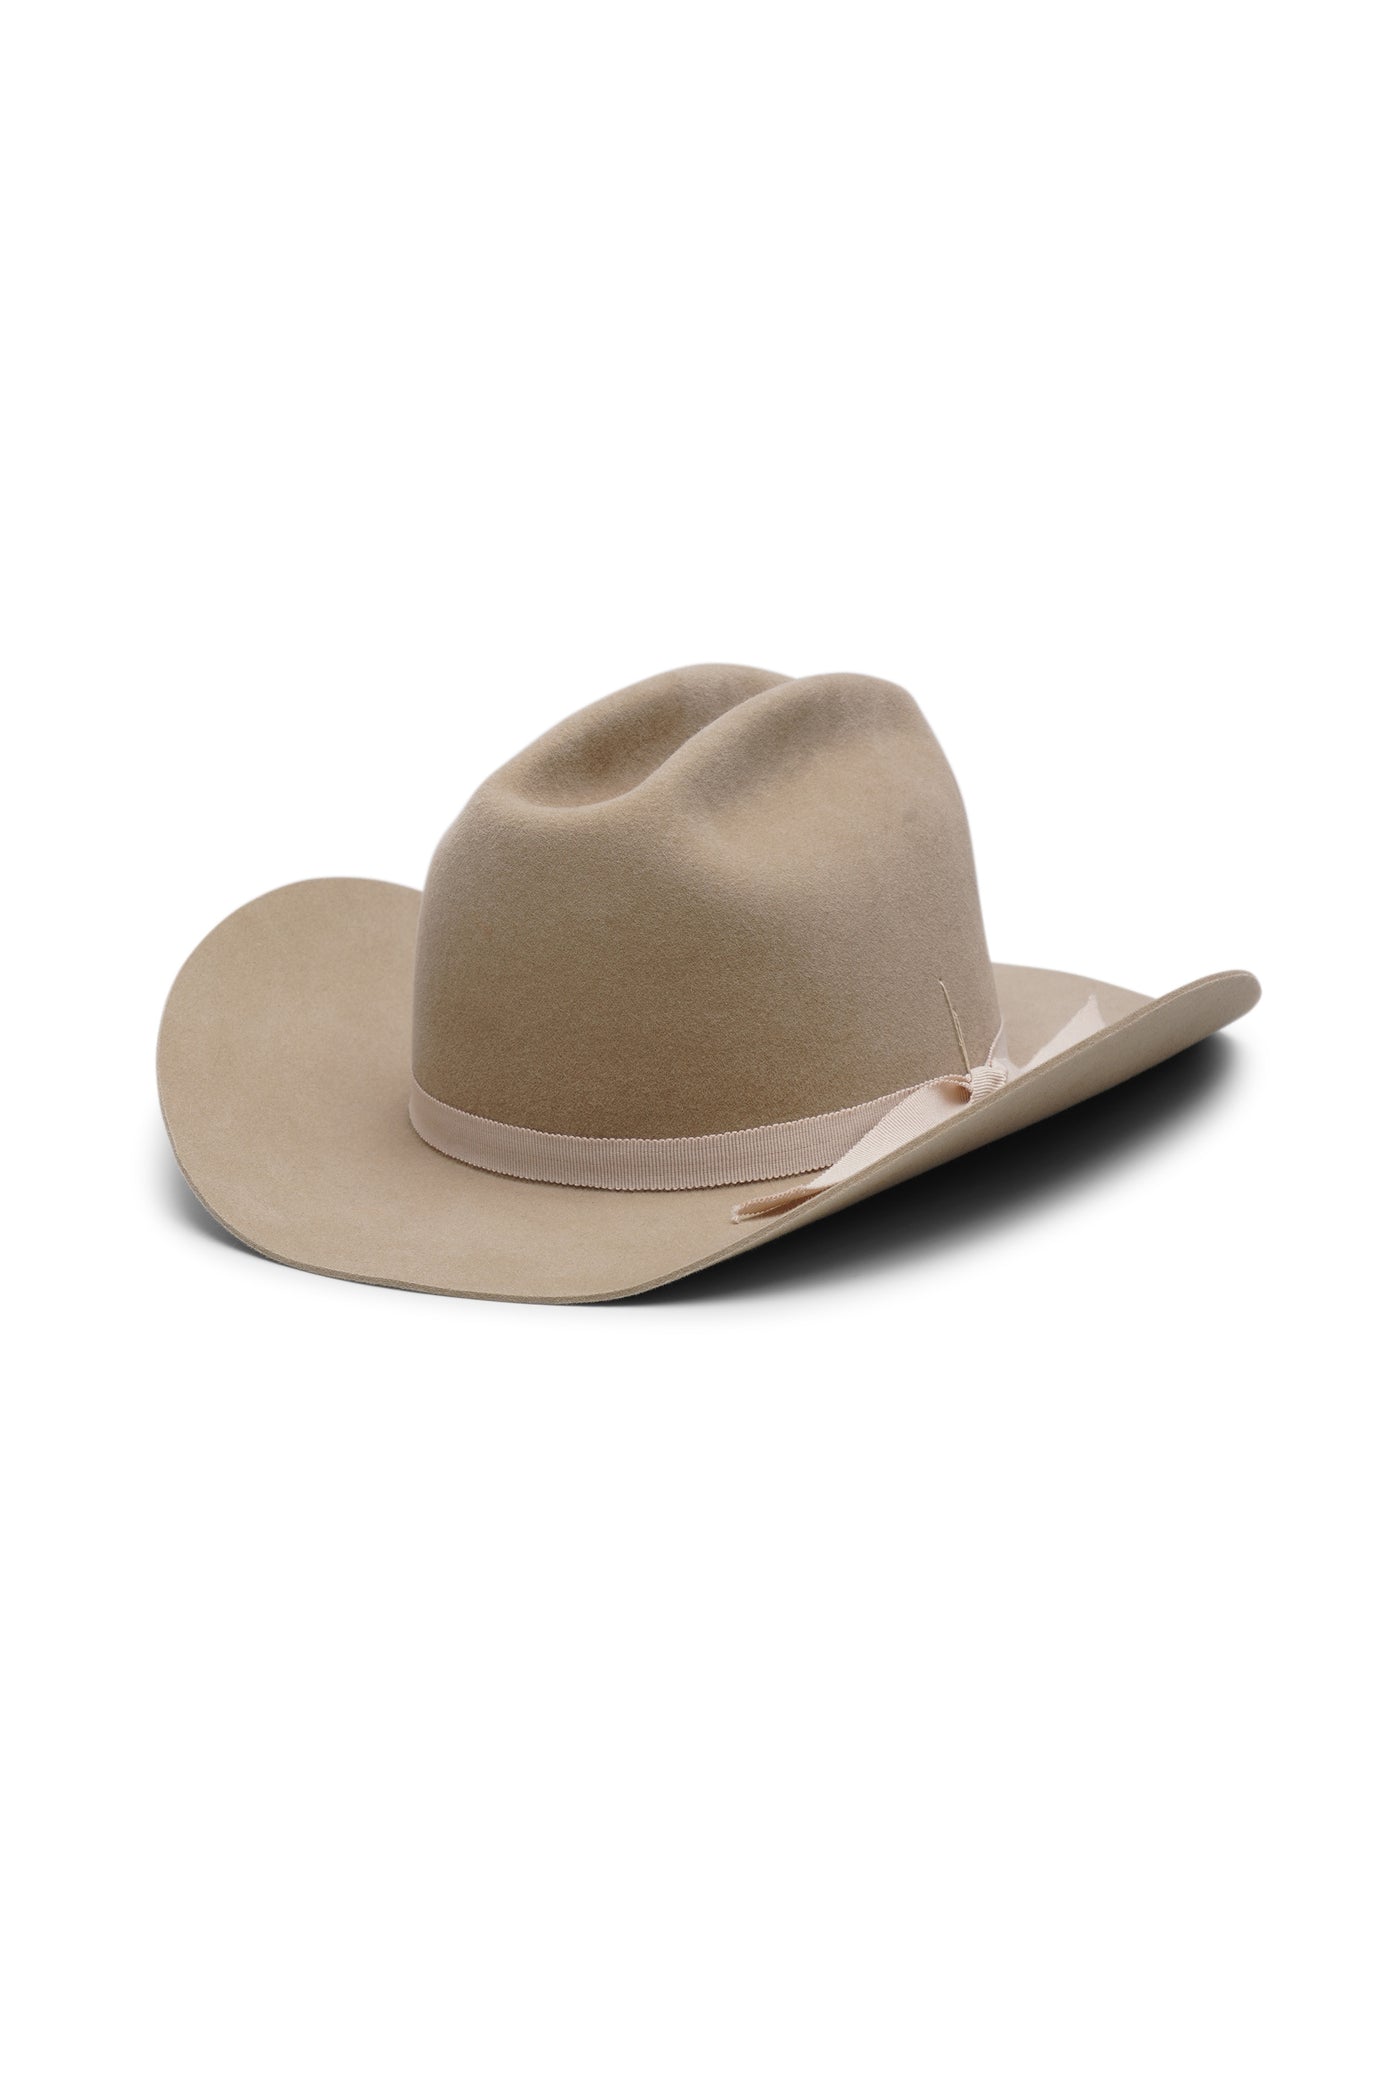 Beige cowboy 100% fur felt hat with a wide brim and center crease. Beige ribbon. Unisex hat style in various sizes and colors. We ship worldwide. Shop now. Each SoonNoon hat is handmade with unique character in Stockholm, Sweden.